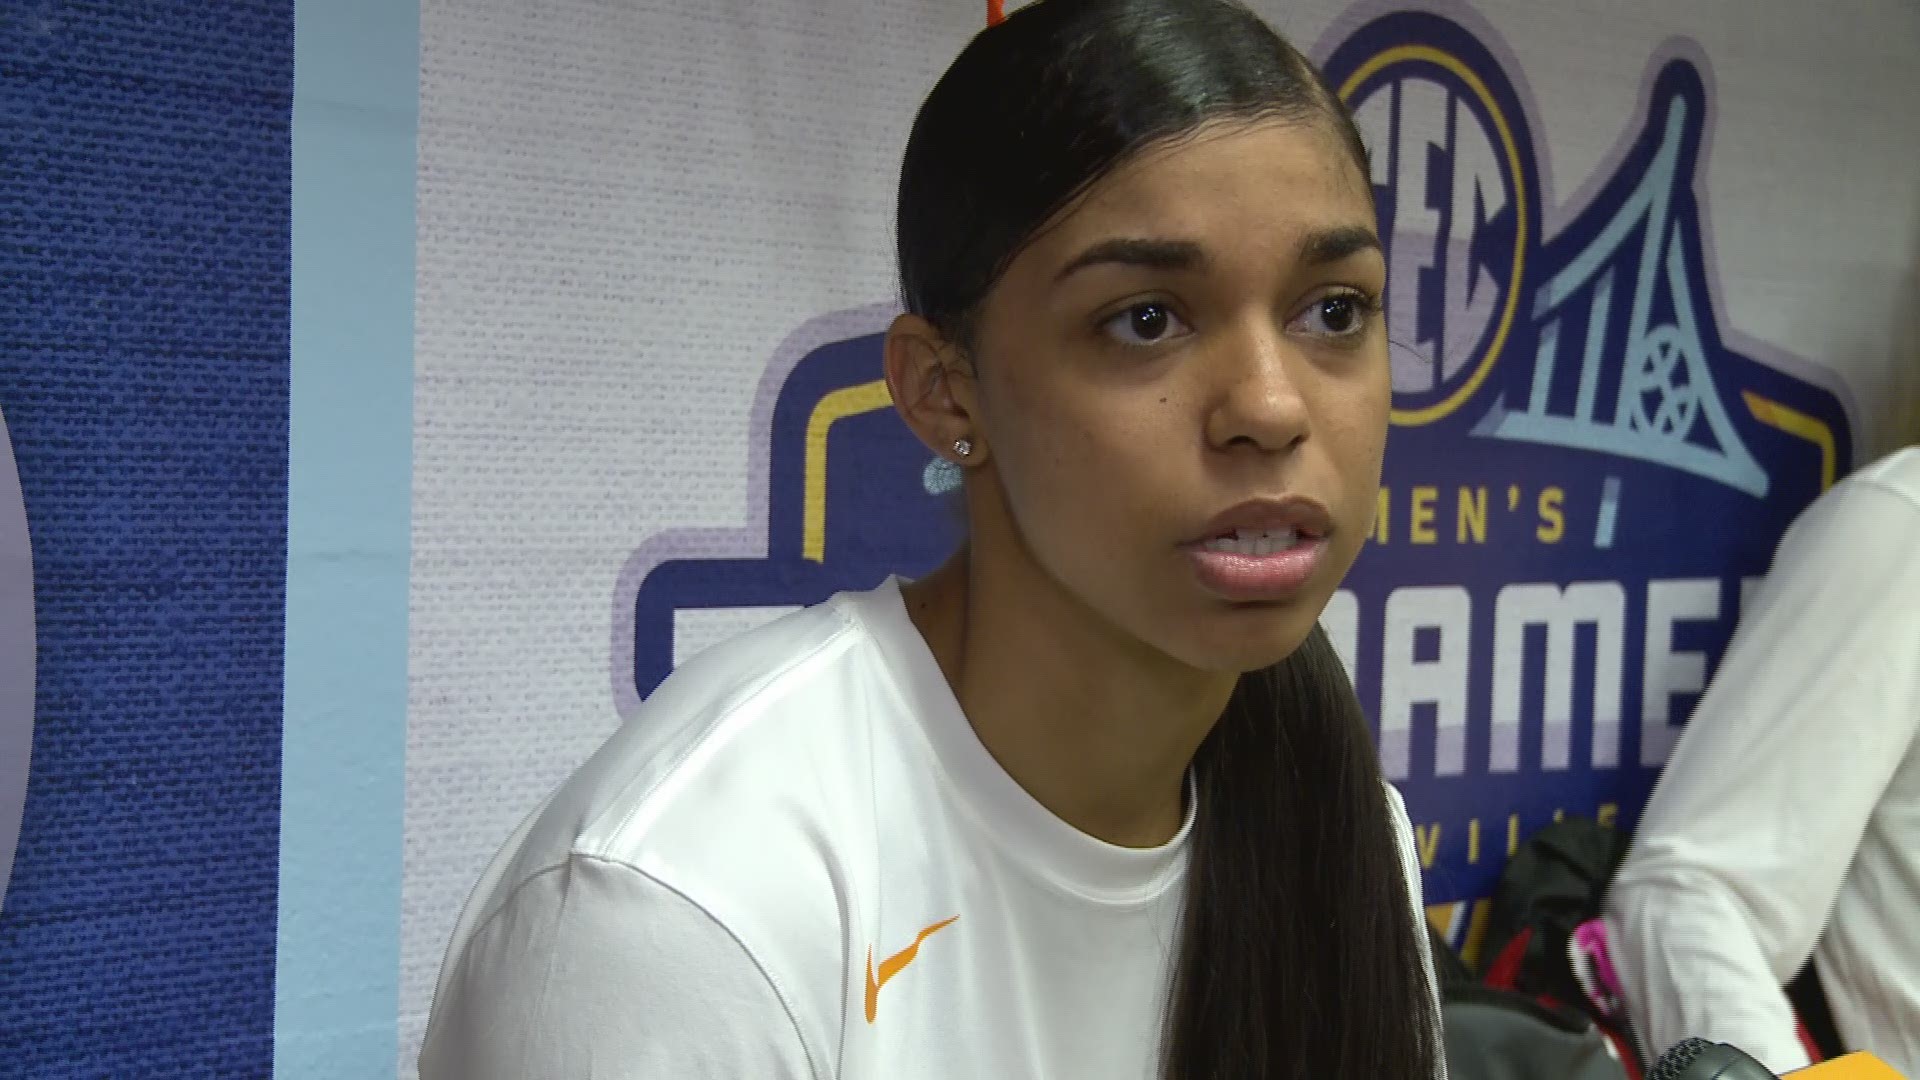 Turnovers, pressure and Mississippi State. Hear from the Lady Vols in the locker room after a win against LSU in the SEC Tournament.